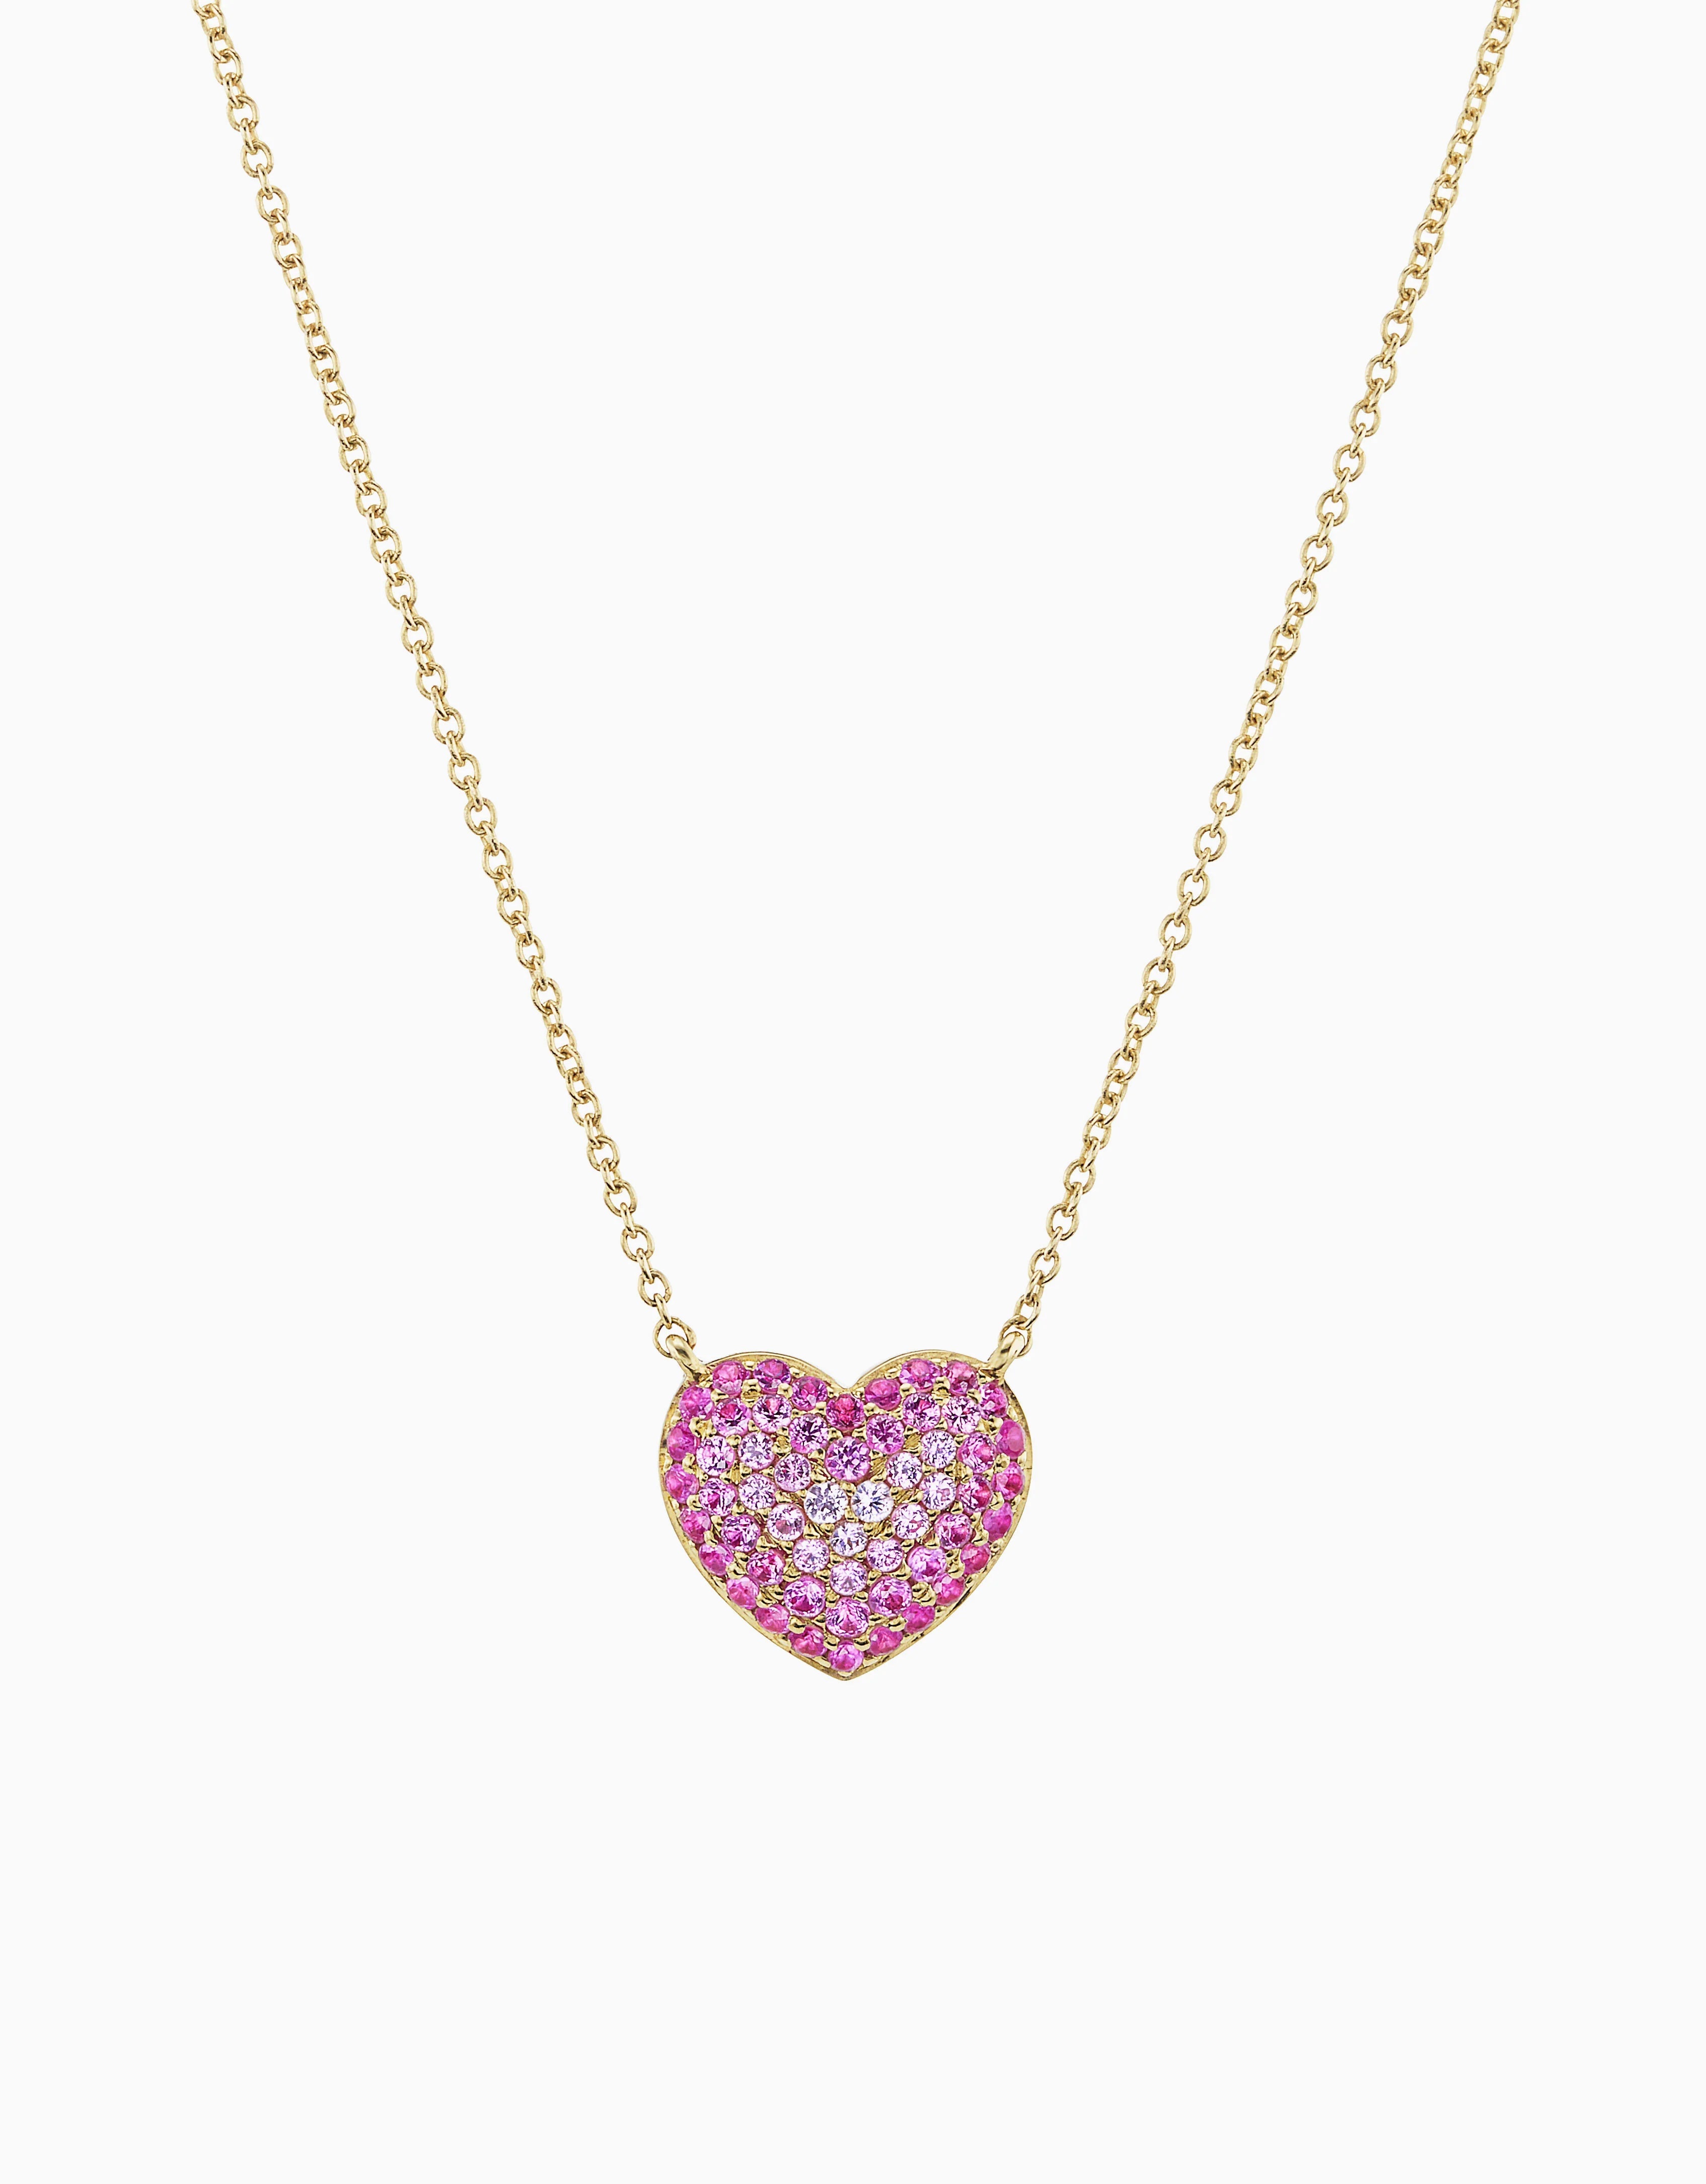 Emily P Wheeler Lucy Heart Necklace with ombre pink sapphire, 16" long - Be On Park